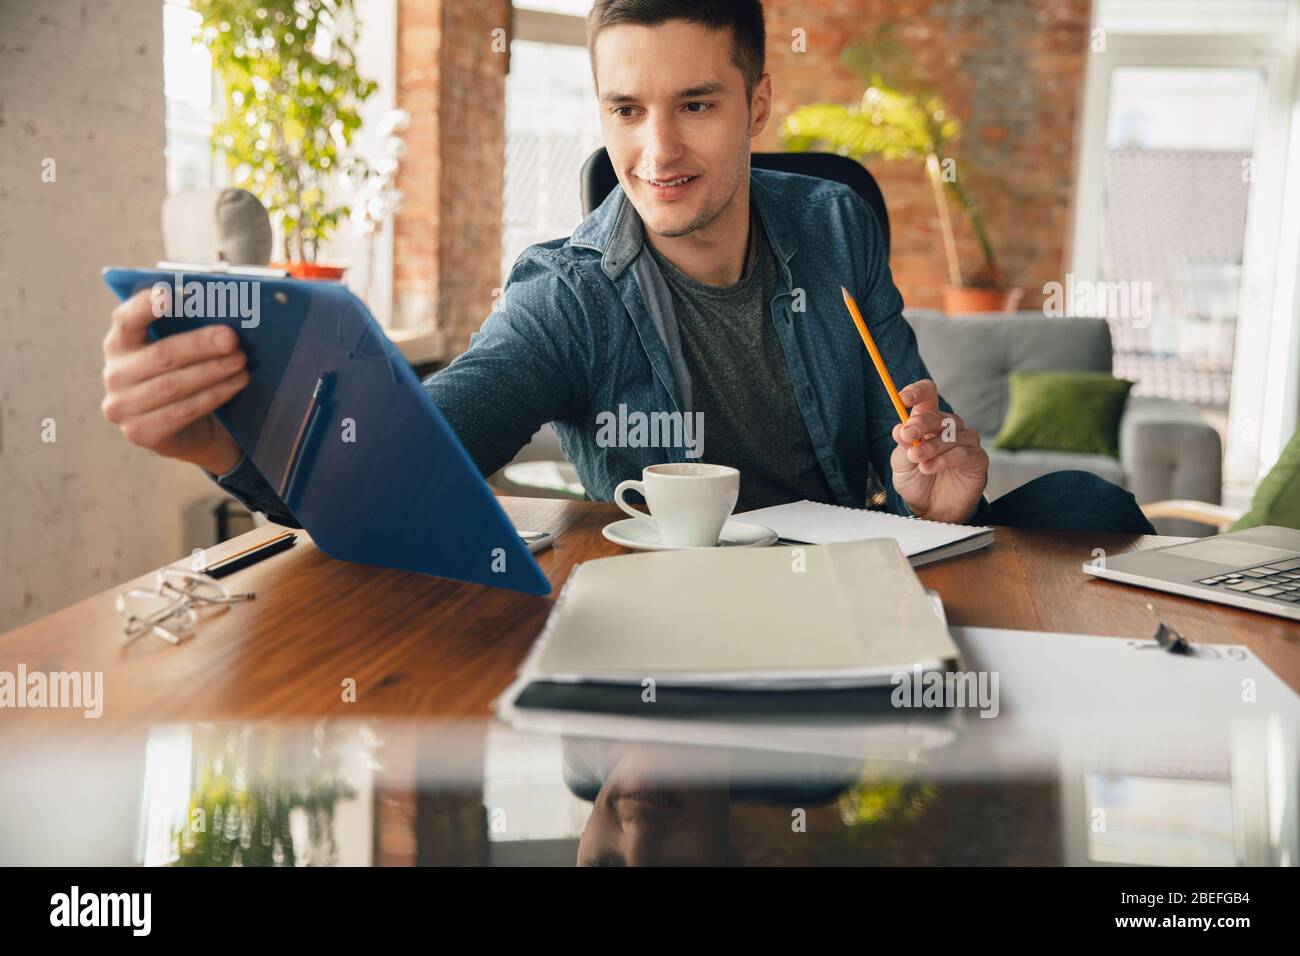 Creative workplace - organized work space as you like for inspiration. Man working in office in comfortable attire, relaxed position and messy table. Choose atmosphere you want - ideal clear or chaos. Stock Photo